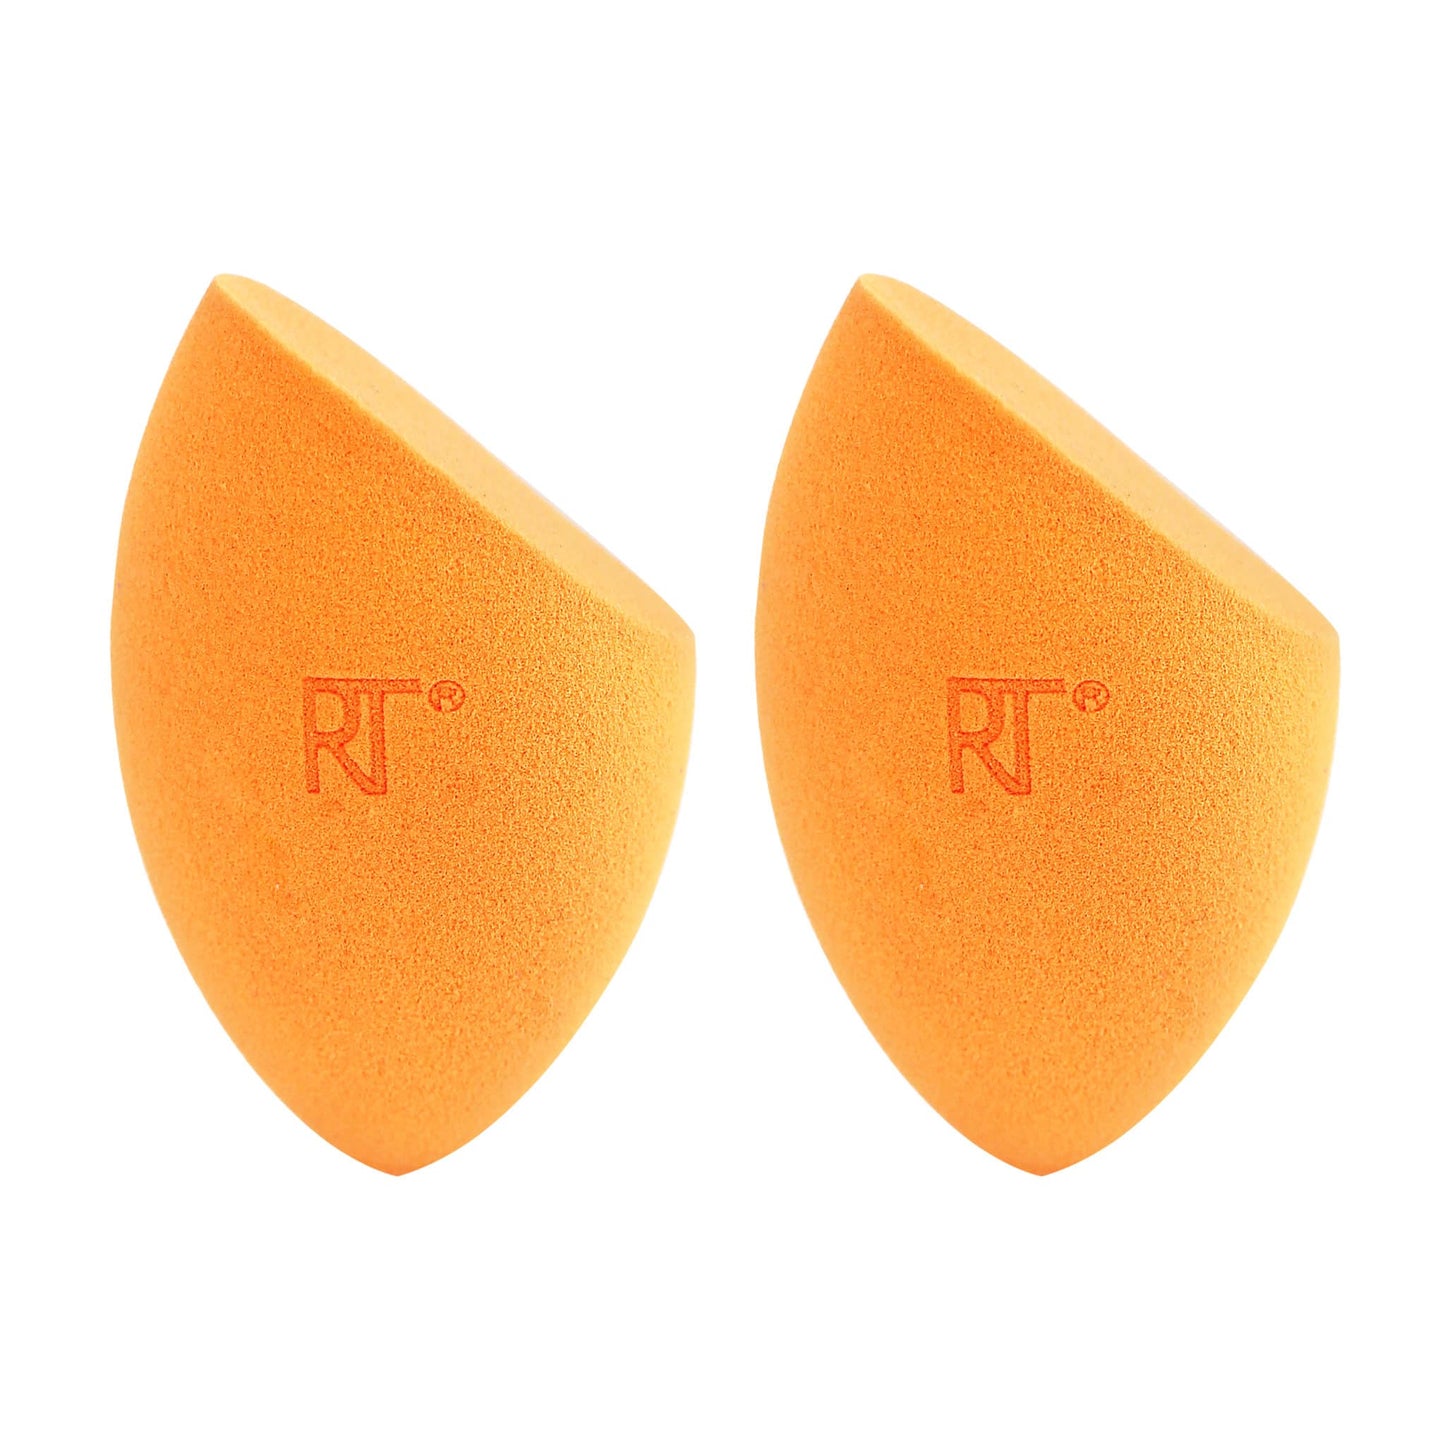 Real Techniques 1462 Antimicrobial Miracle Complexion Sponge® 2 Pack